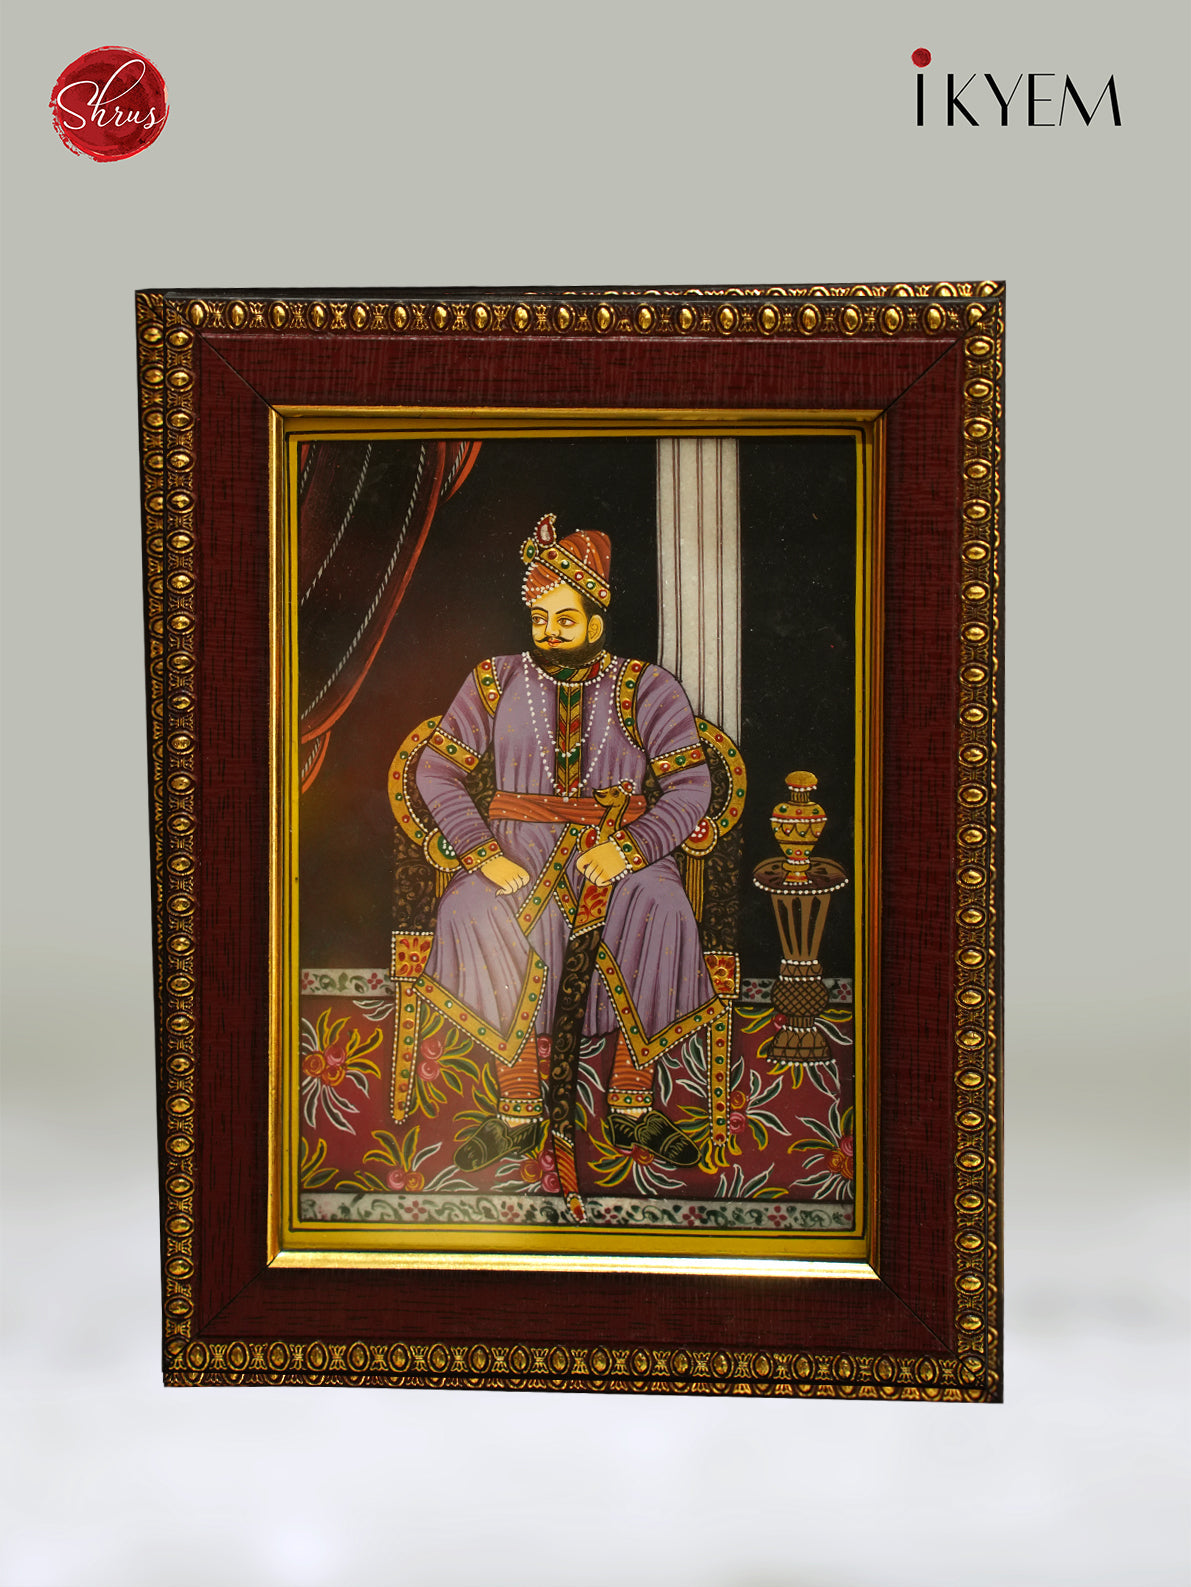 Hand painted king portrait in marble tiles with frame